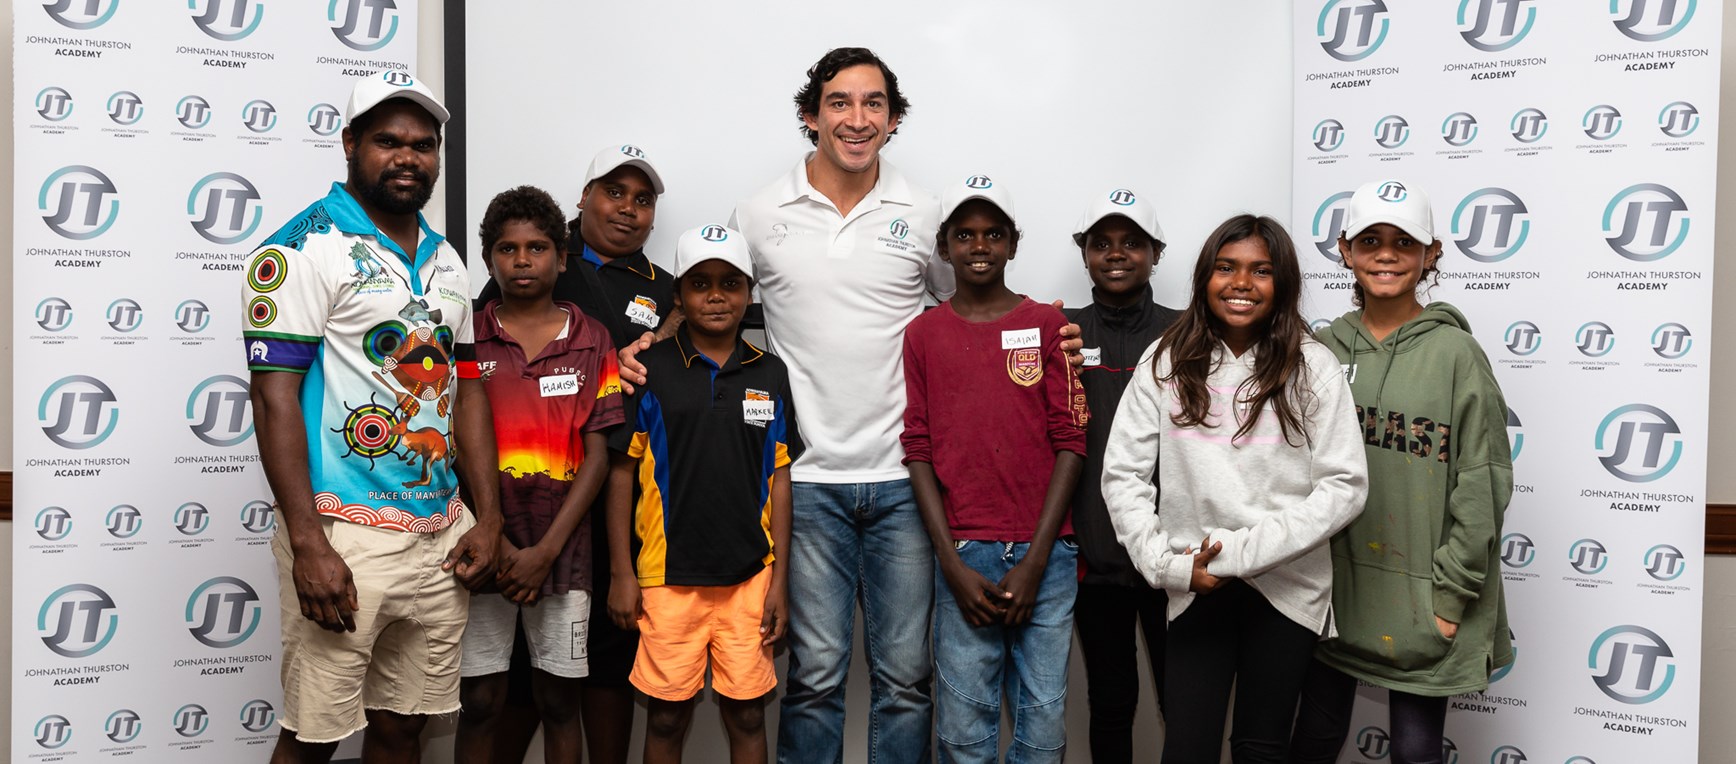 In pictures: First JTBelieve Camp